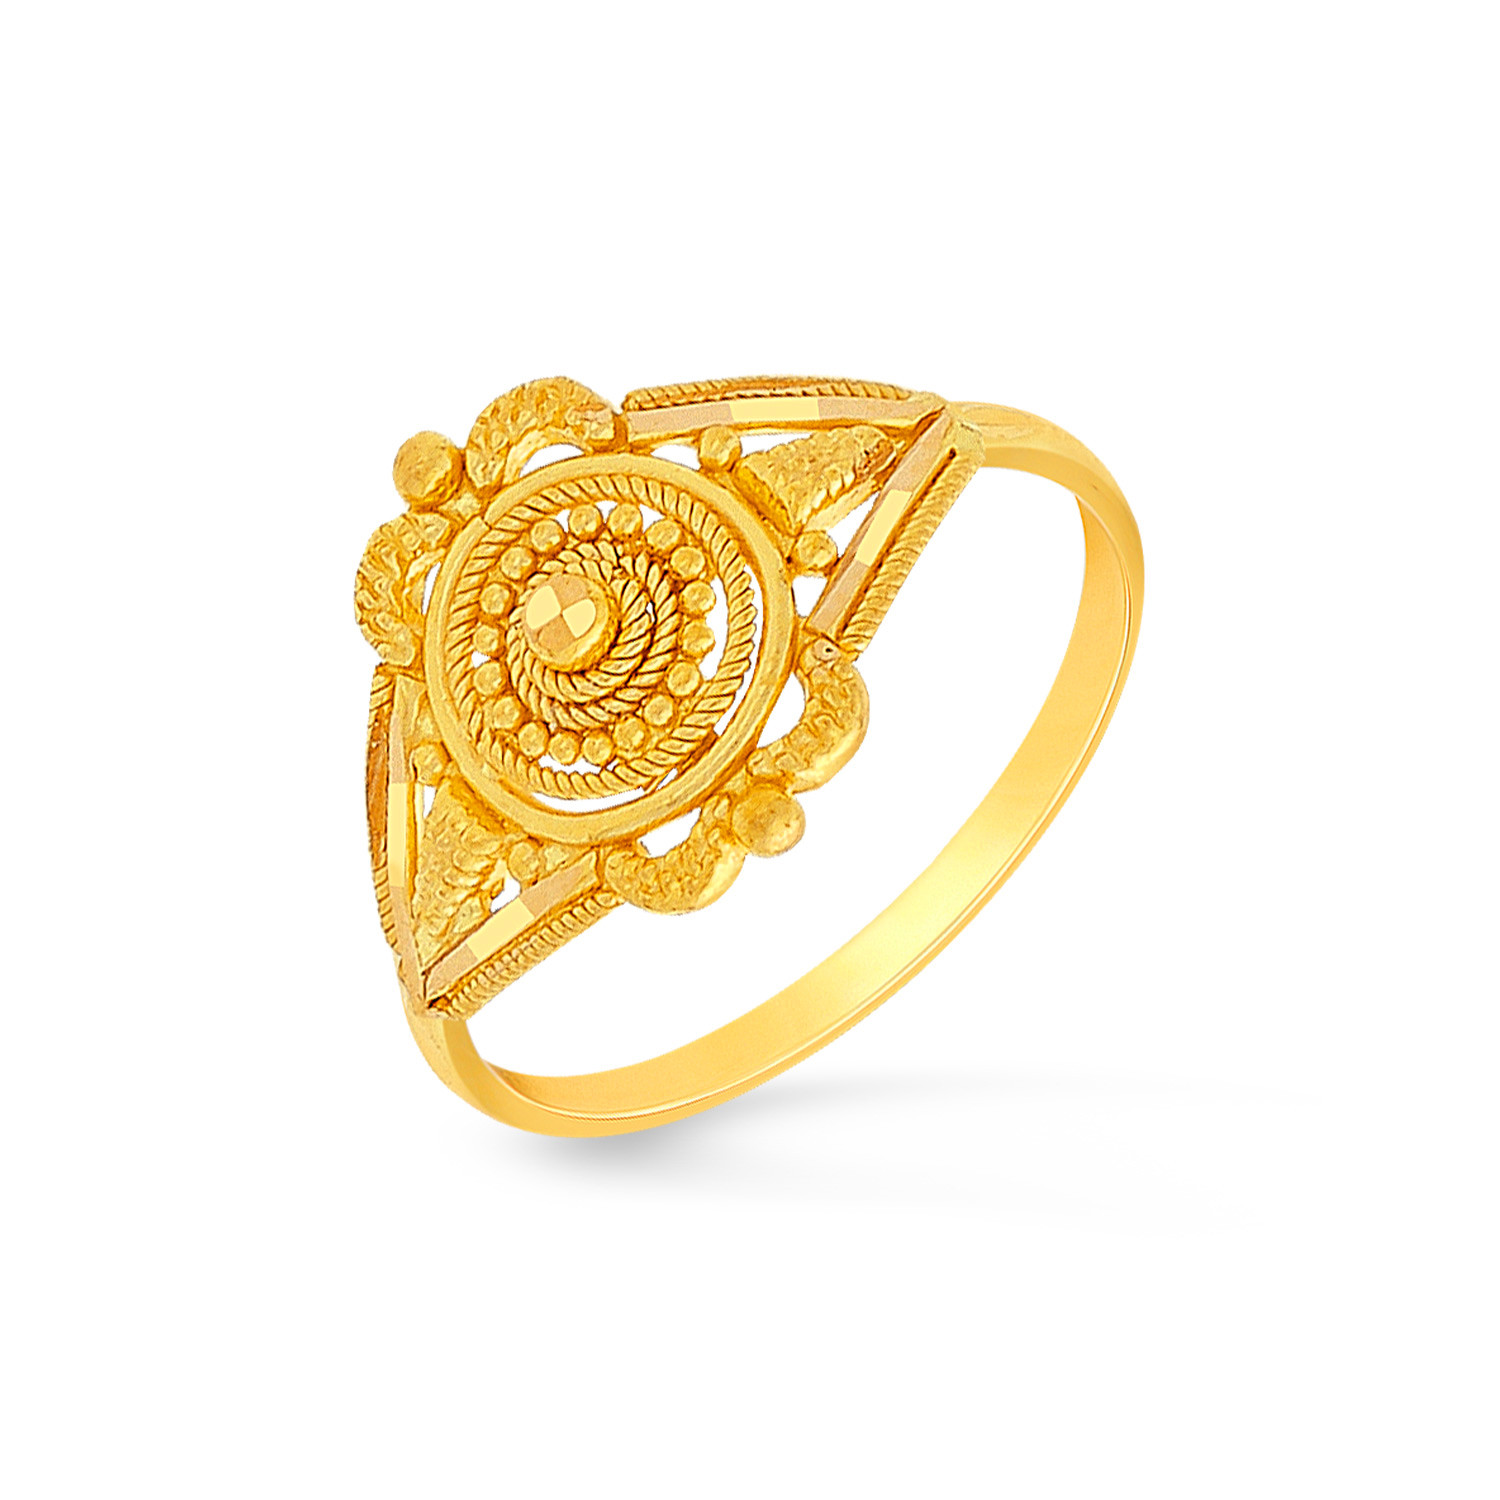 Buy Malabar Gold and Diamonds 22 kt Gold Ring for Kids Online At Best Price  @ Tata CLiQ